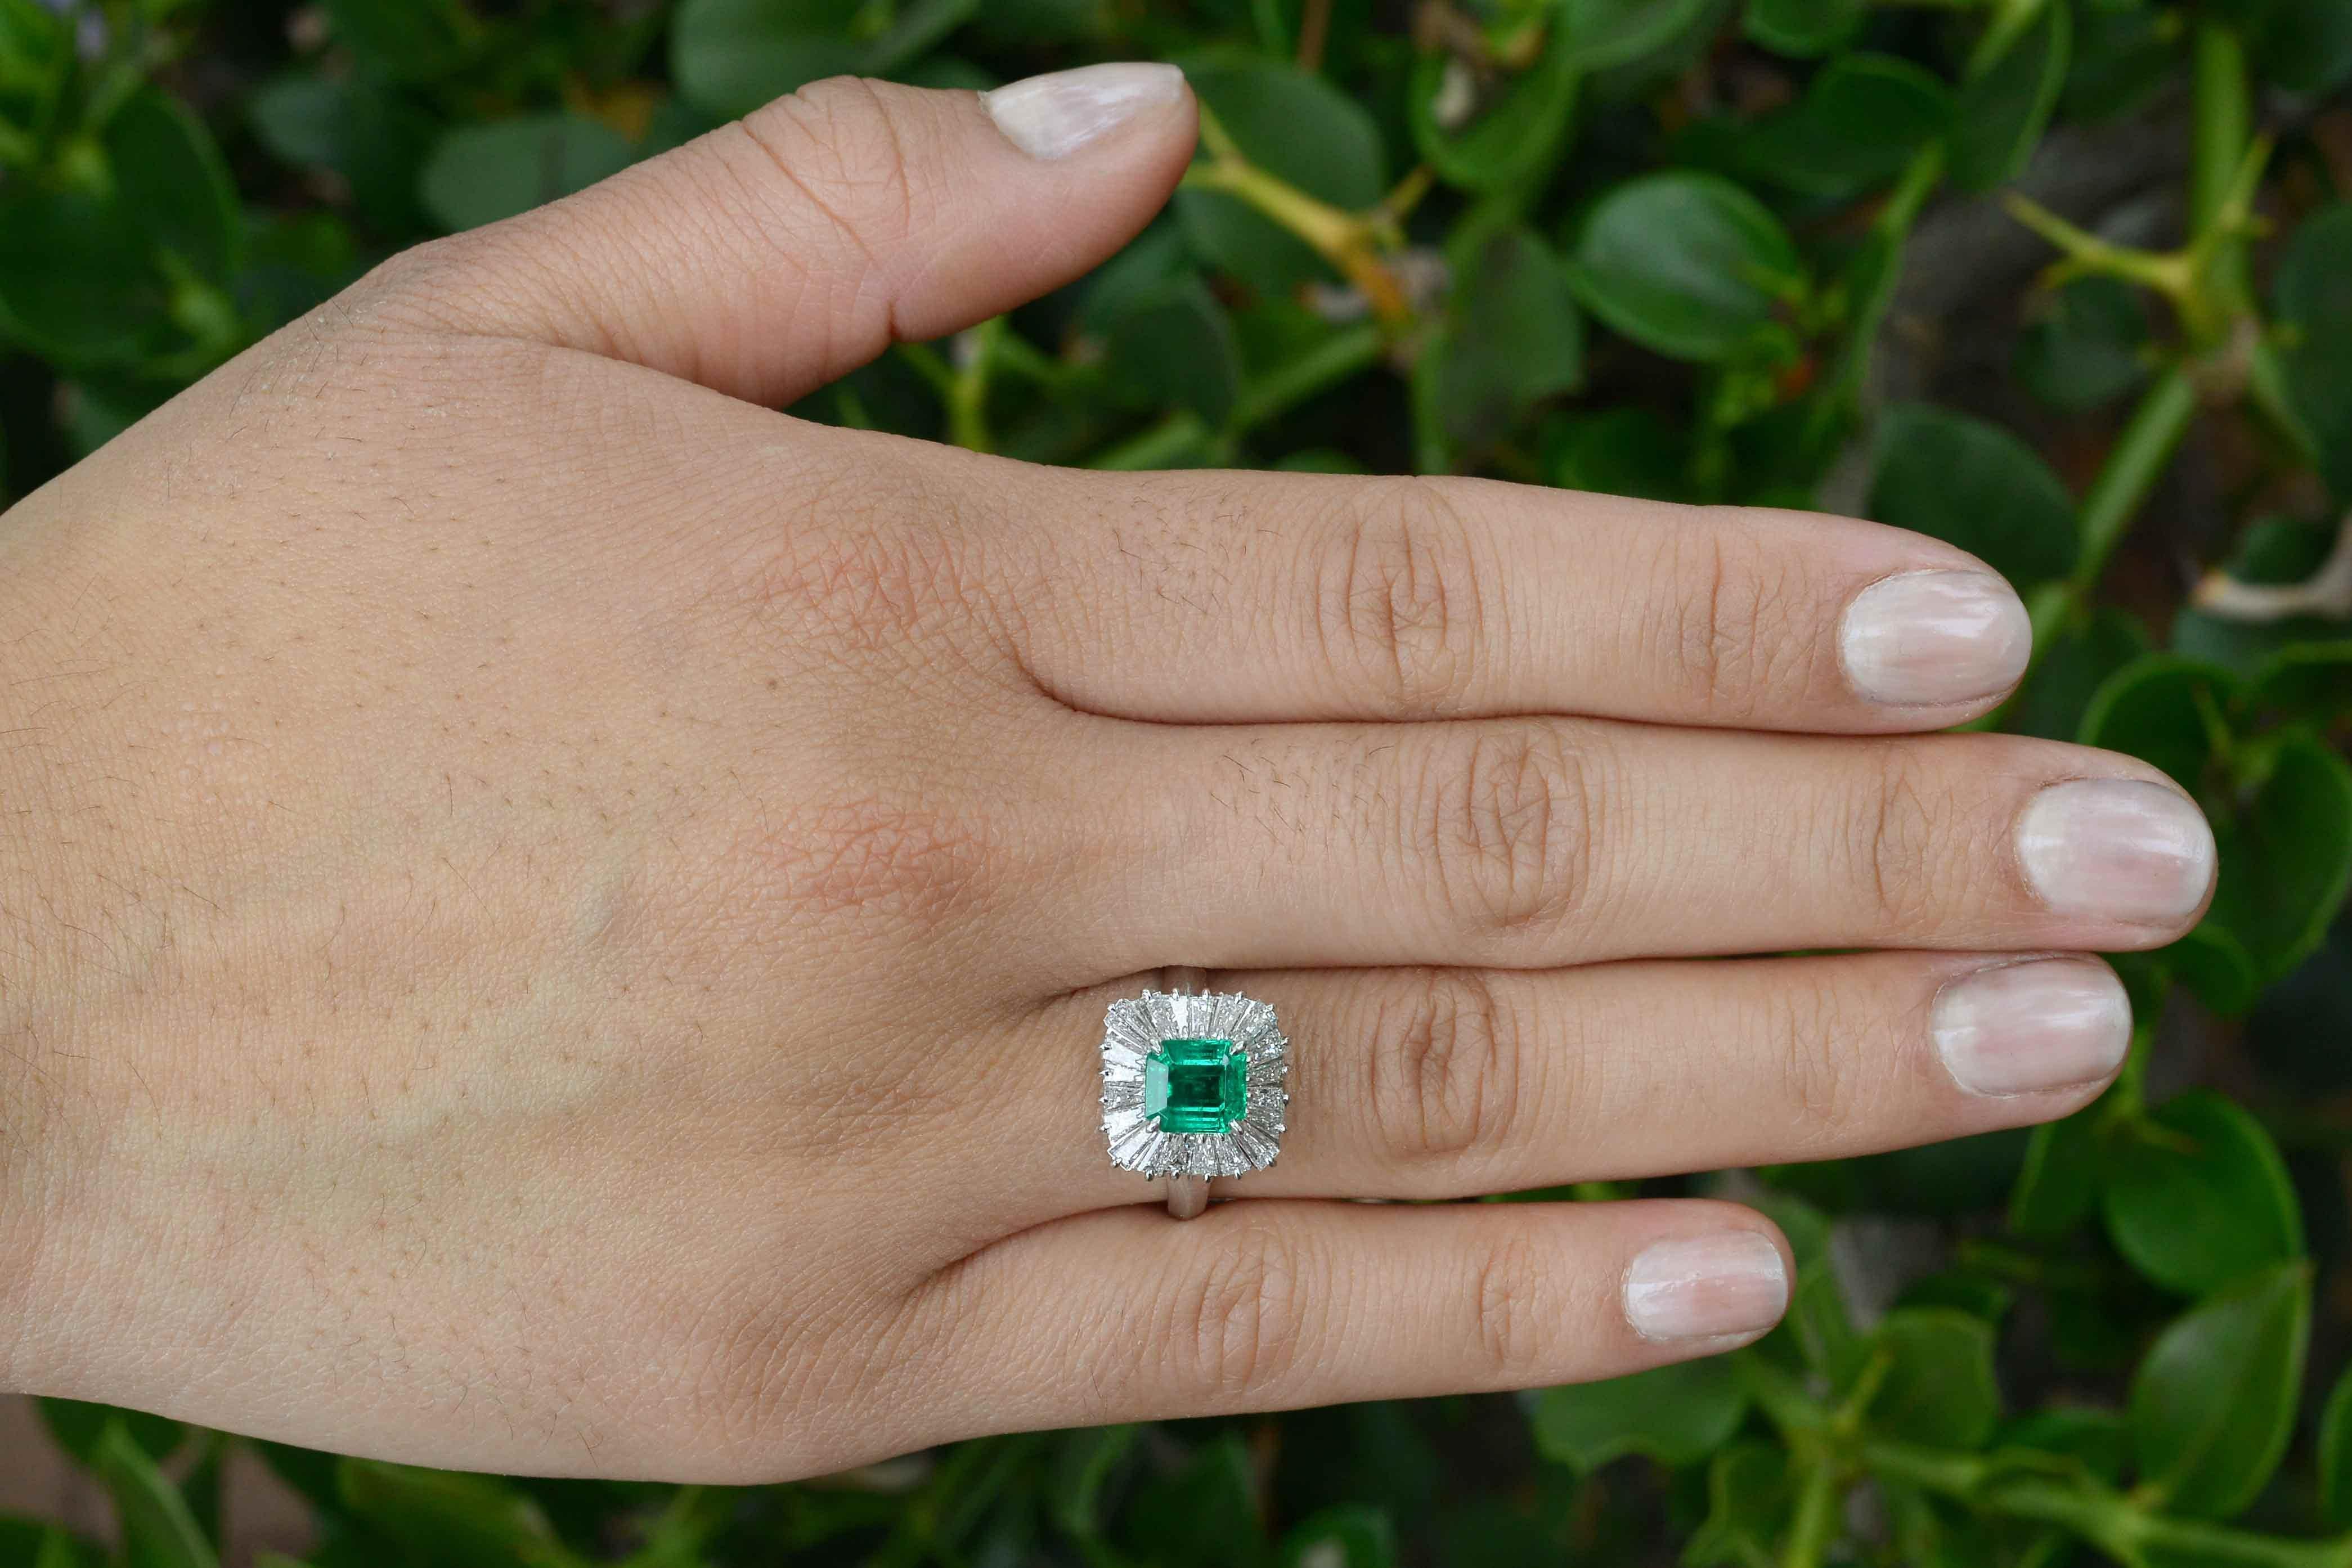 Centered by a breathtakingly lush and vivid green 1 1/2 carat emerald within a ballerina cocktail ring surrounded by 20 scintillating baguette diamonds. Named for the undulations of a tutu, the wavy design accentuates the gemstone and envelopes it